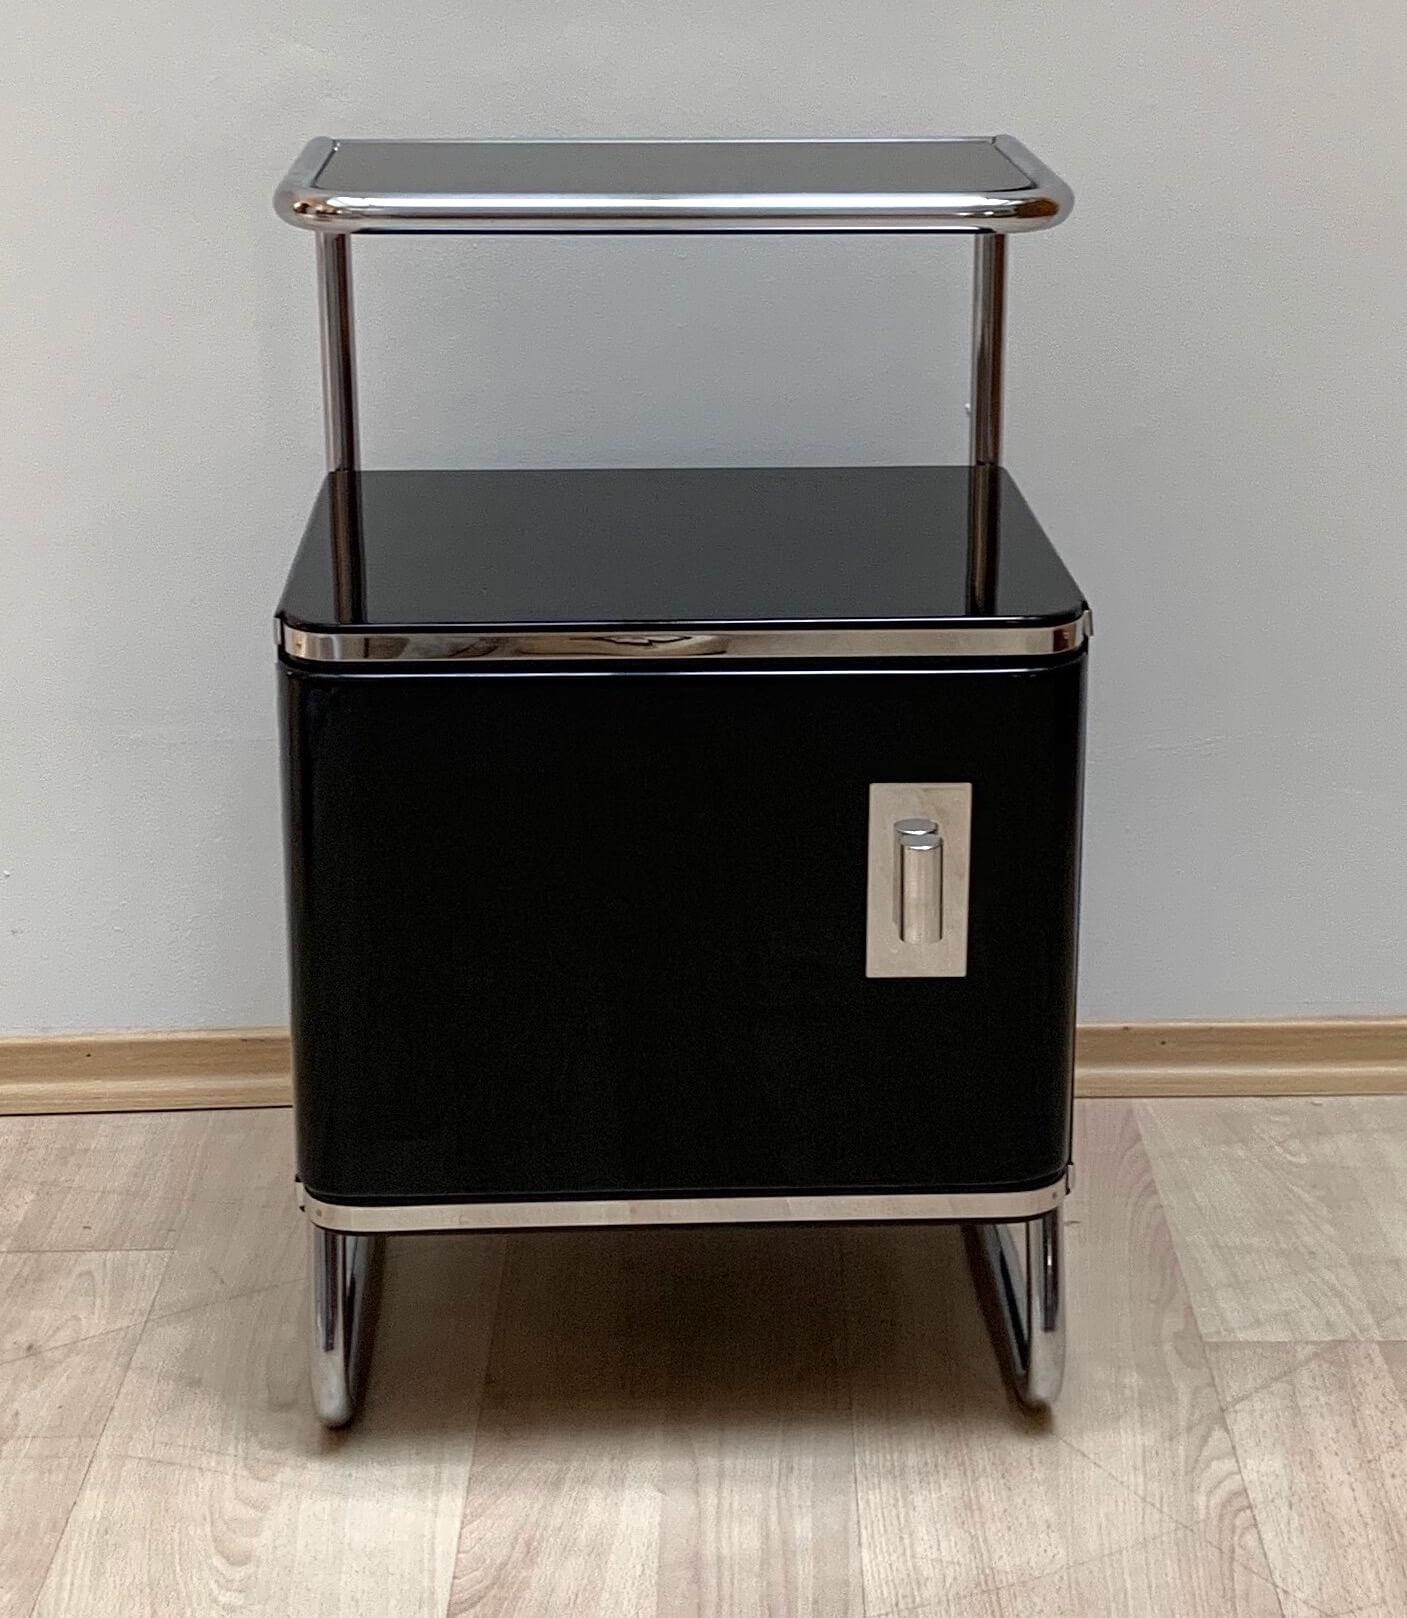 Very elegant German Bauhaus nightstand / bed side table from Germany about 1930.

(Newly) Chromed steeltube frame with black lacquered wooden box.
Black glass plate (36 x 21,5 cm) on top.

Completely restored with new black piano lacquer and newly